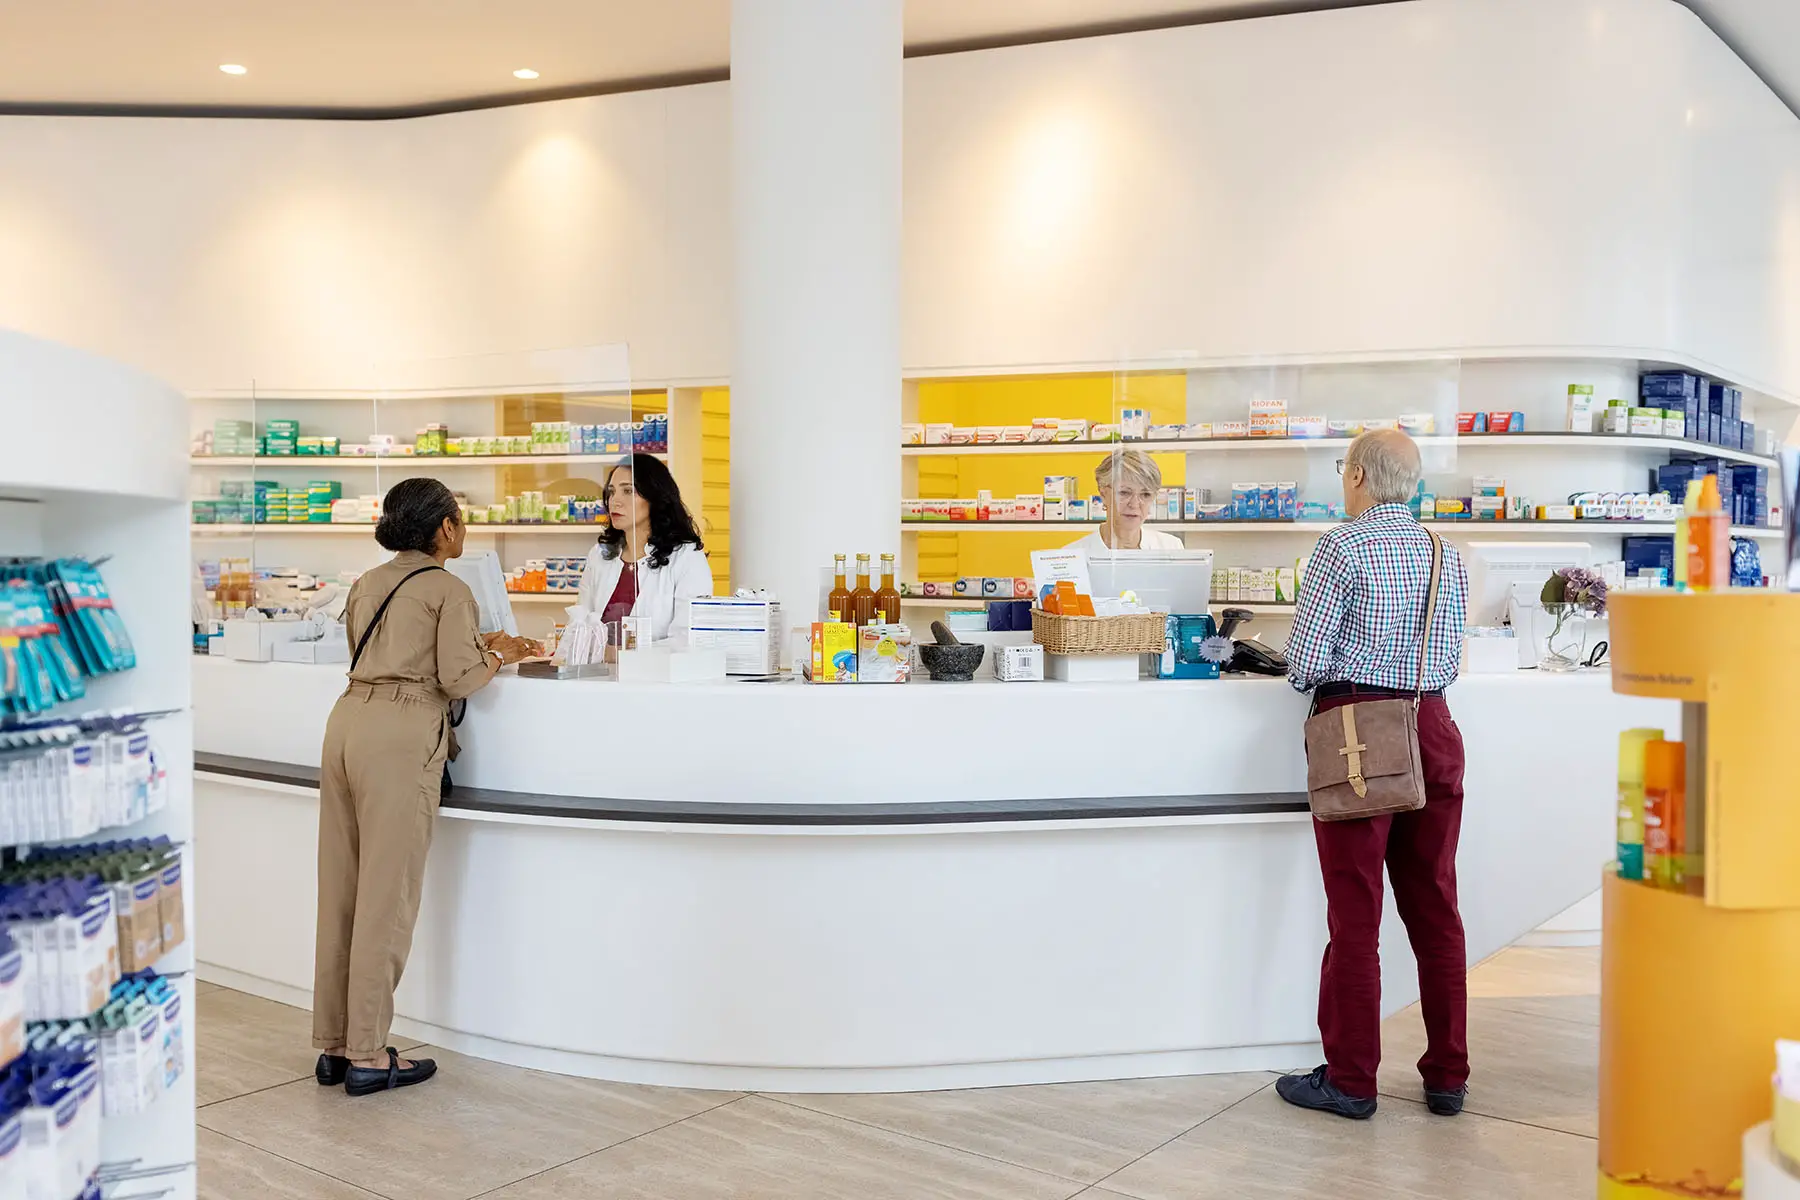 Two pharmacists standing behind the counter and assisting customers in a pharmacy store.